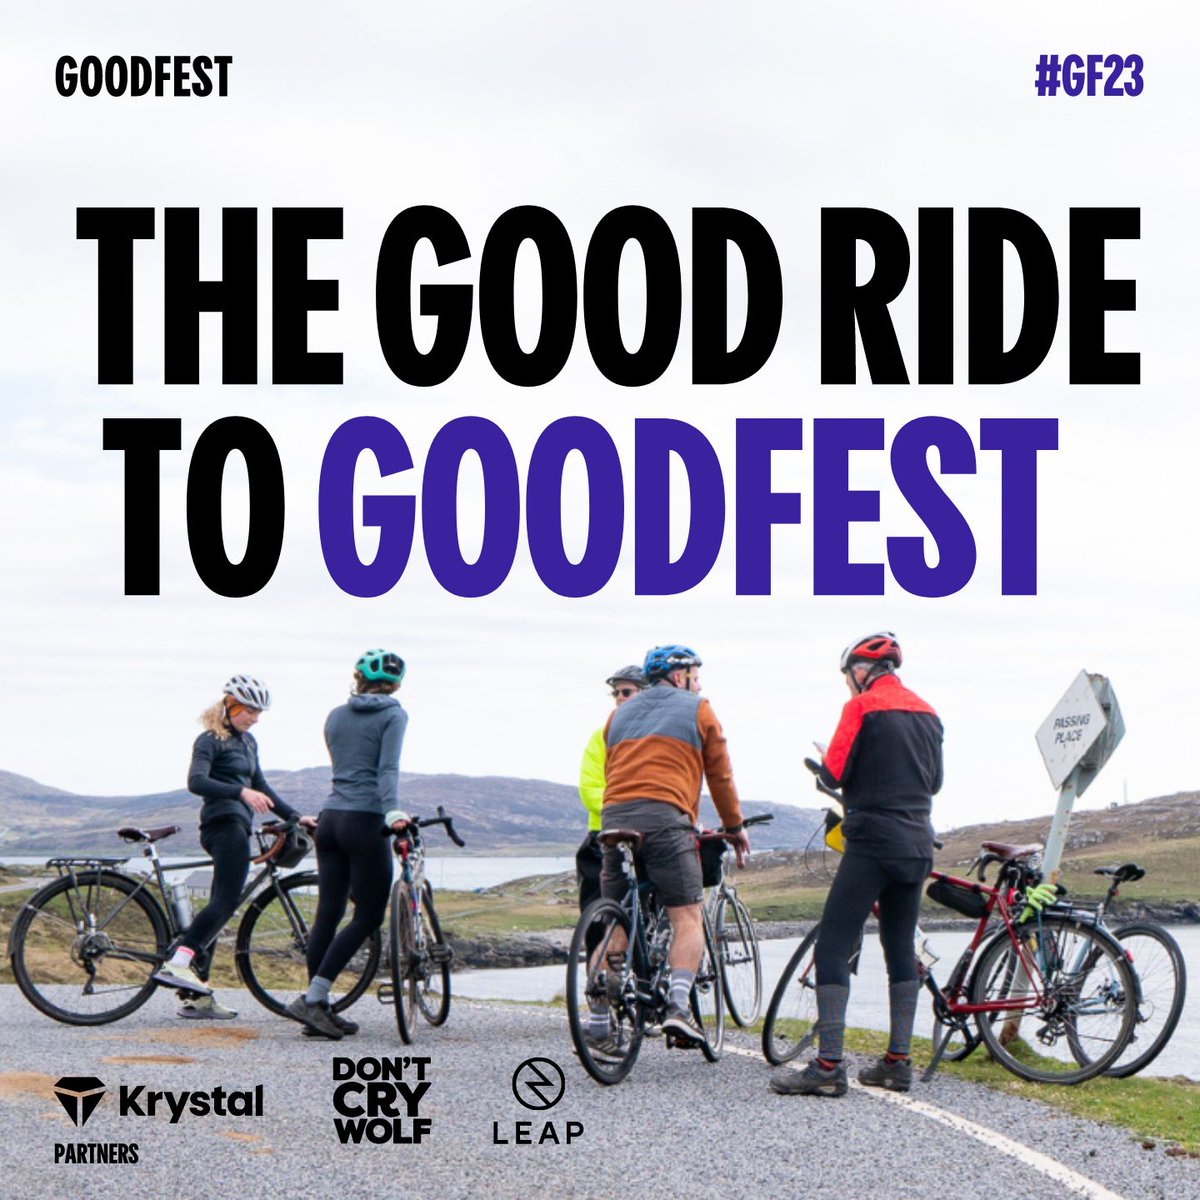 Safe travels to our Good Riders who today embark on the first part of their journey from Exeter to Bedruthan, Led by the brilliant @ShalynWilkins 🚲 #TheGoodRide #GF23 #Goodfest #GoodfestCornwall @AdventureUncvrd @Ecologi_hq @Leapness